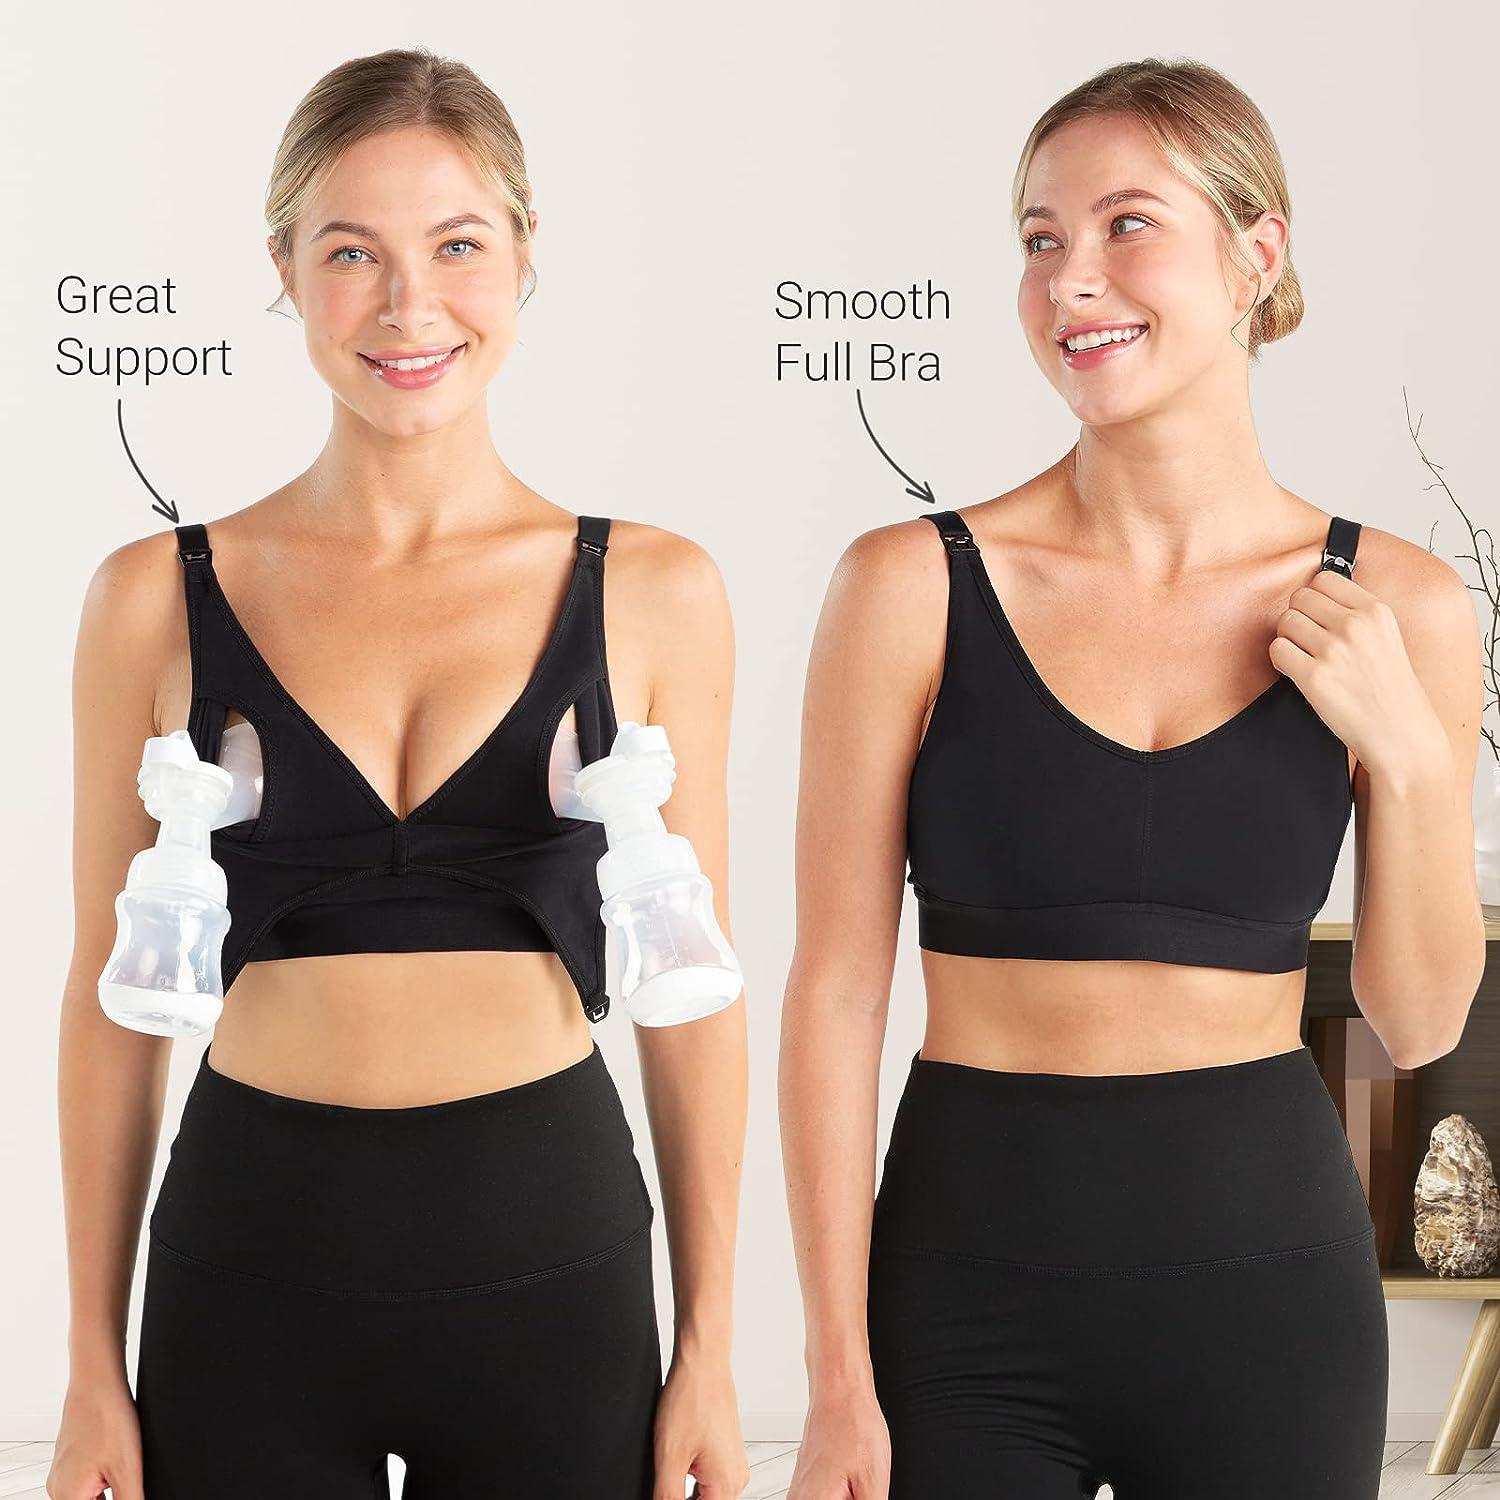  Momcozy Seamless Pumping Bra Hands Free, Comfort and Great  Support Nursing and Pumping Bra, Fit for Spectra, Lansinoh, Philips Avent  and More, XX-Large Black : Baby